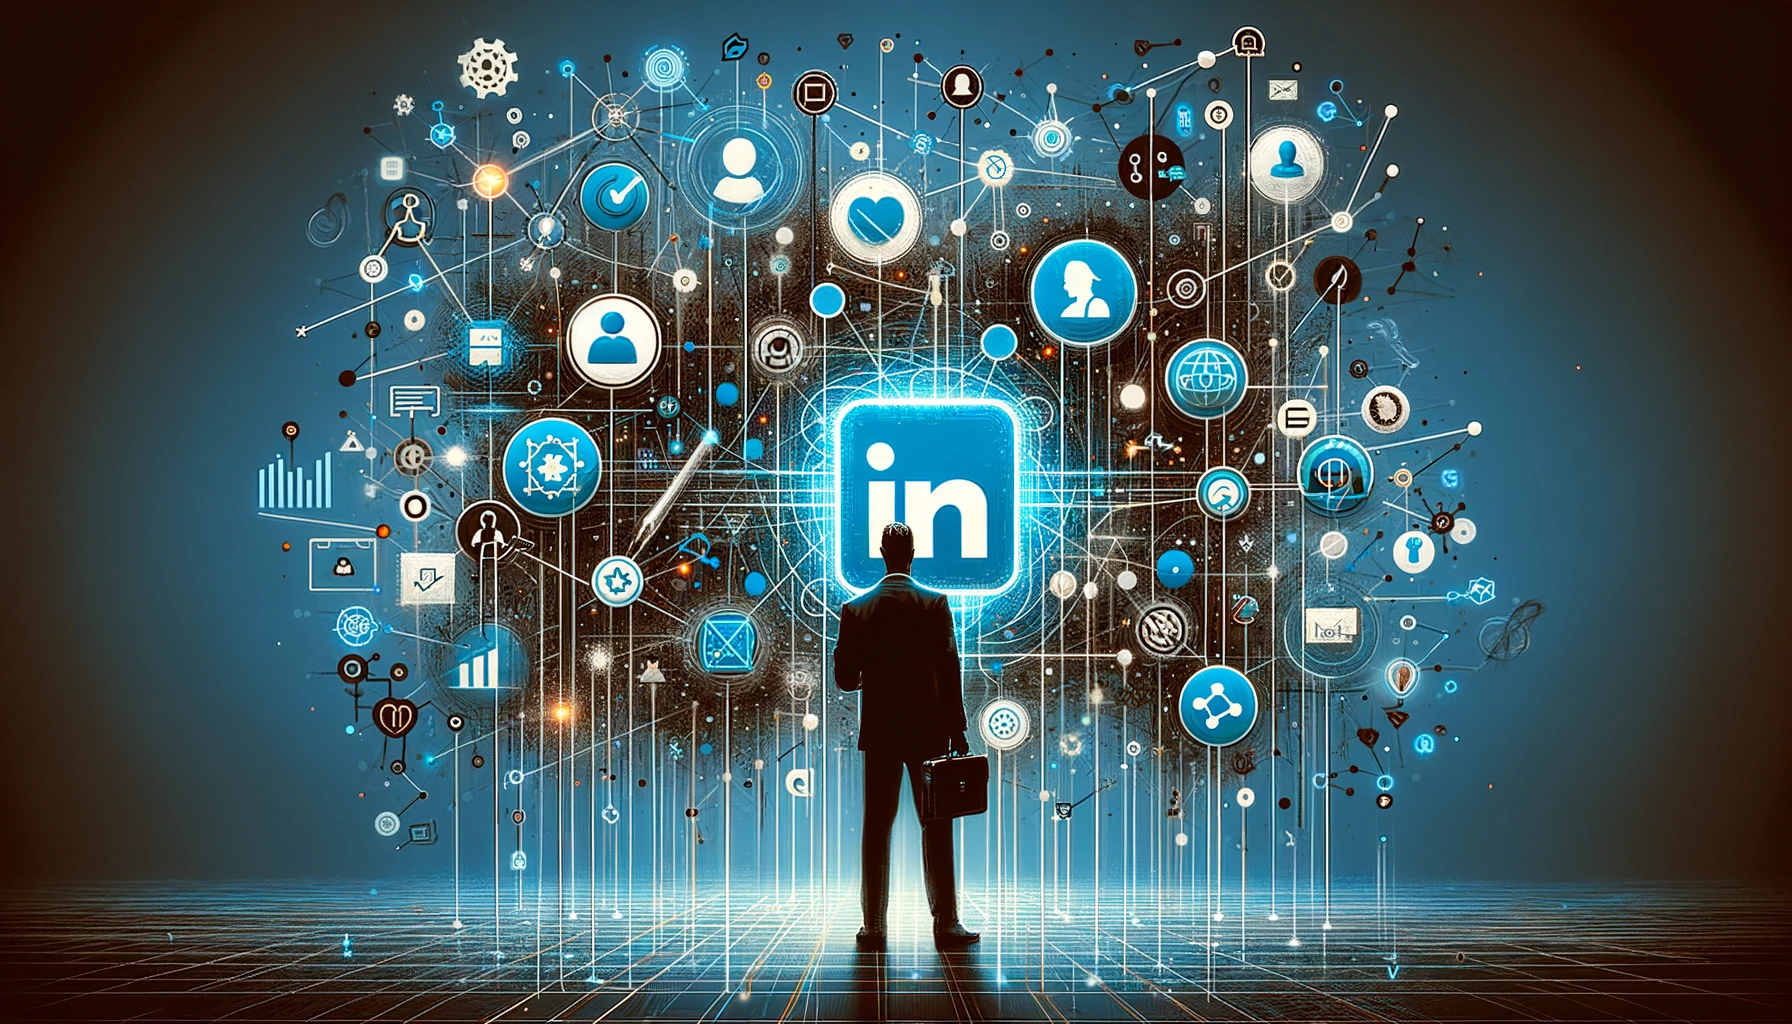 Abstract representation of impactful LinkedIn Sponsored Content, featuring interconnected nodes, growth symbols, and professional figures.